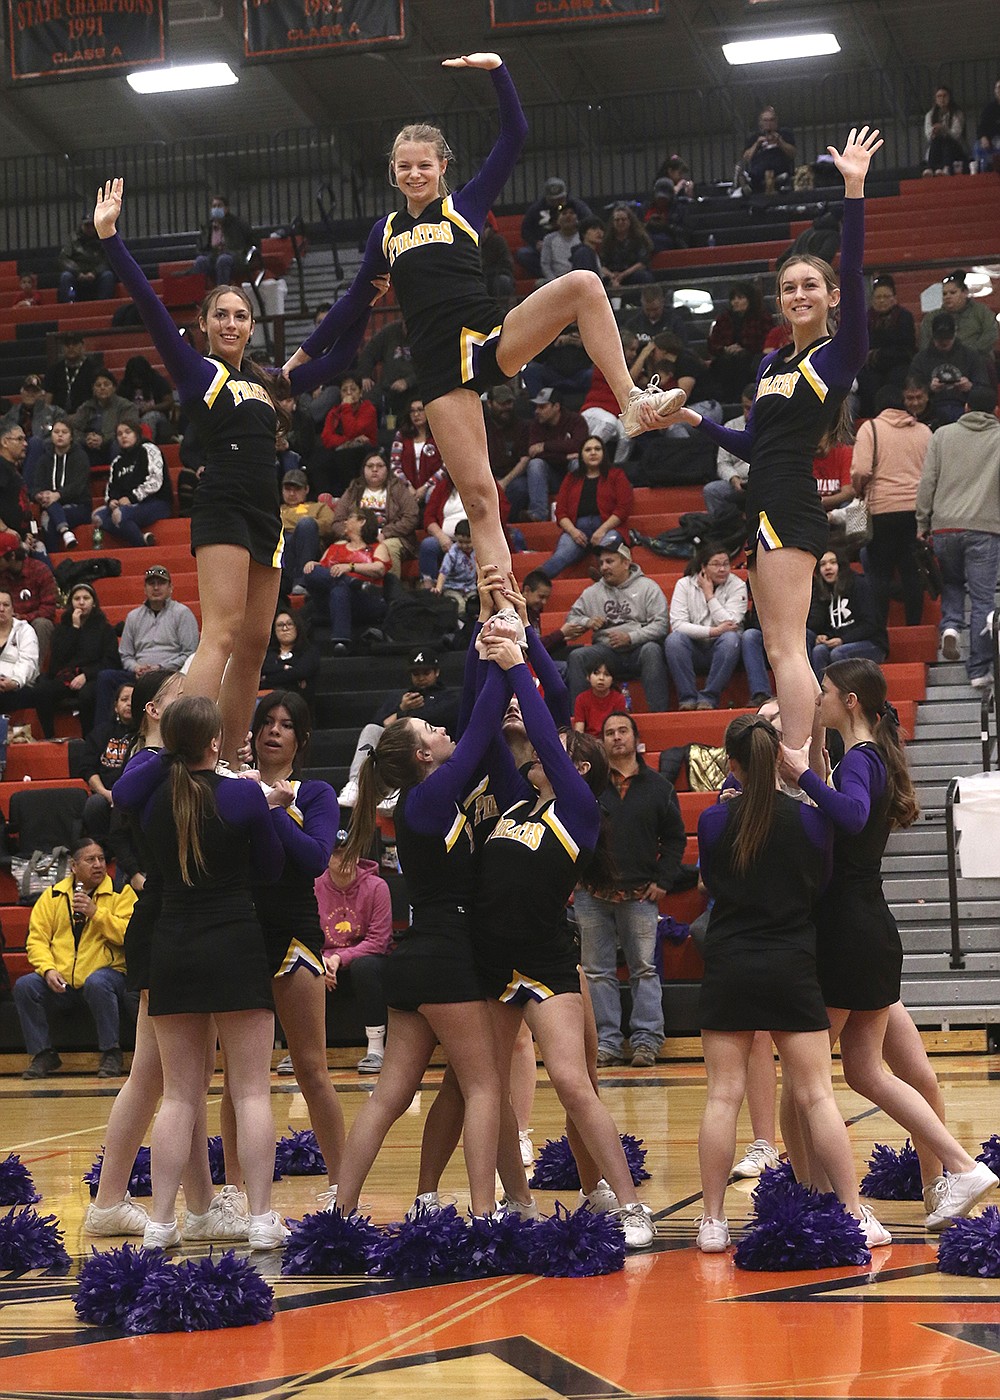 The Polson's Cheer Team roots for the Pirates at last week's Class A Divisional Tournament in Ronan. (Bob Gunderson photo)